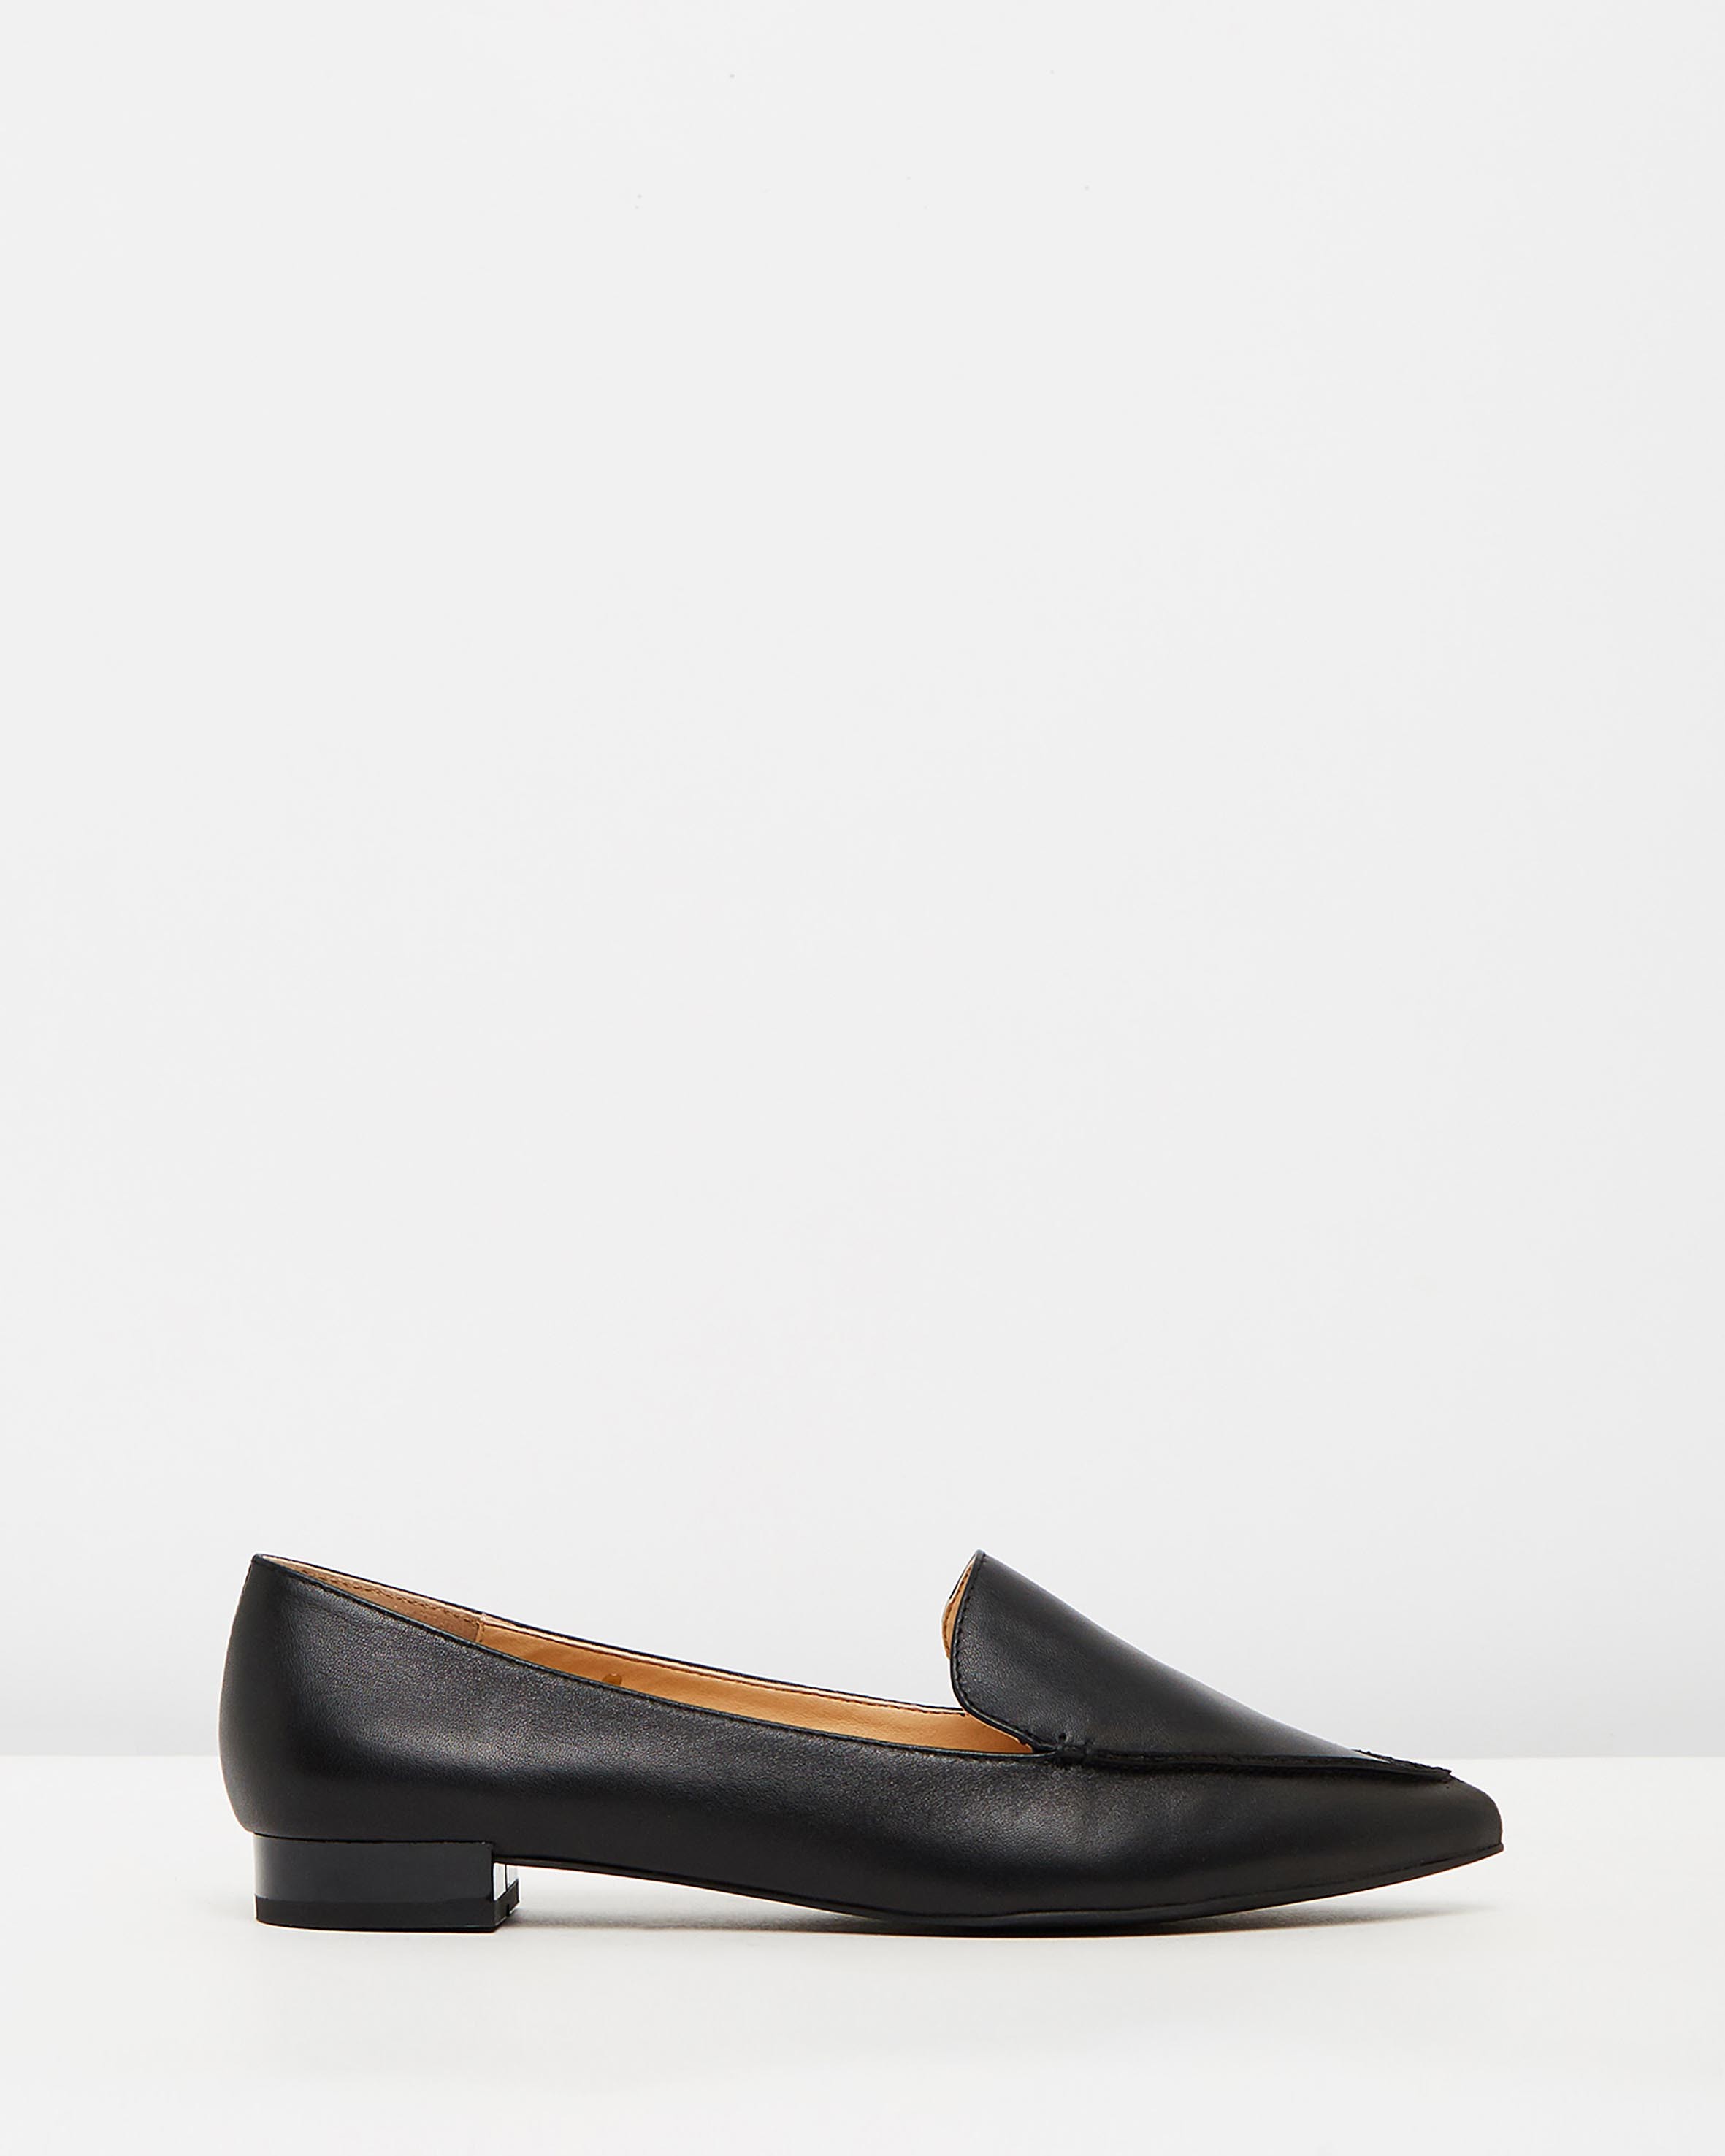 Casey Leather Flats Black Leather by Atmos&Here | ShoeSales